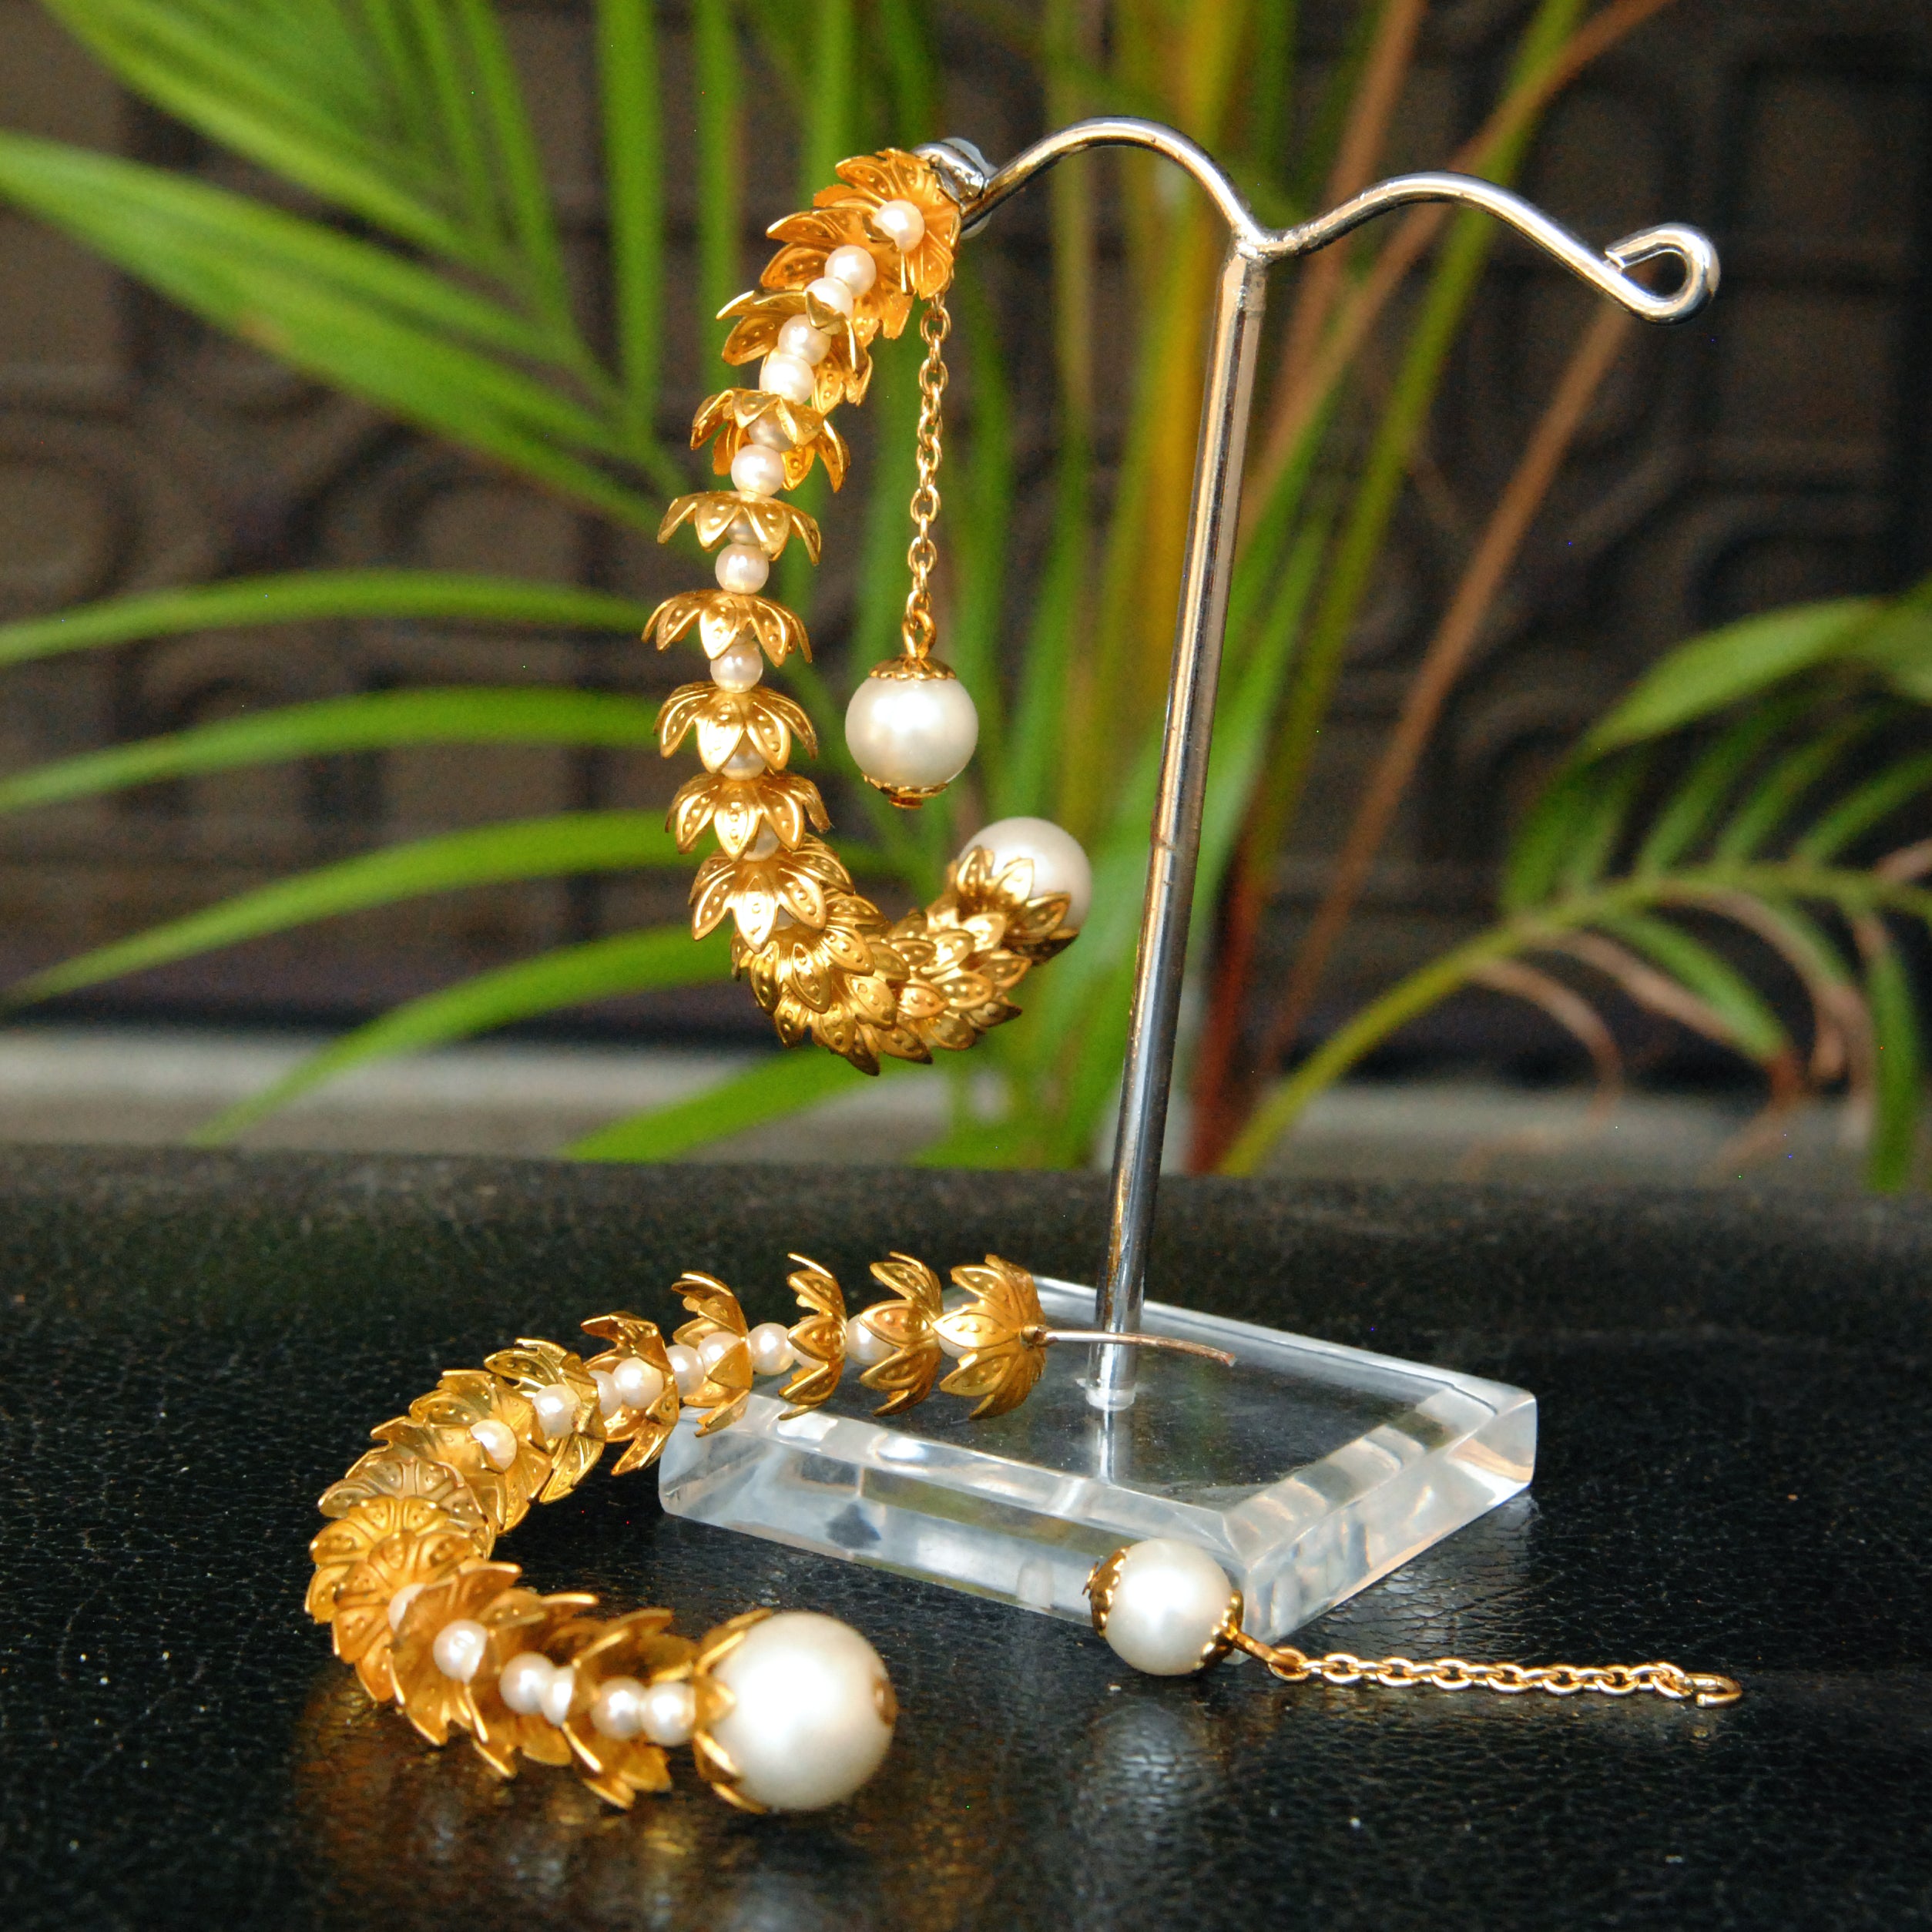 Beabhika Handmade Artificial Jewelry Gold Tone Hald Hoops Earrings Unique Stylish Fashion Jewelry For Gen Z Fashion Stylish Statement Earrings Bollywood Fashion jewelry Available On COD In India Delhi Golden Color Half Hoops White Color Pearls Dangling Pearl Earrings Traditional Heeramandi Style Jewelry